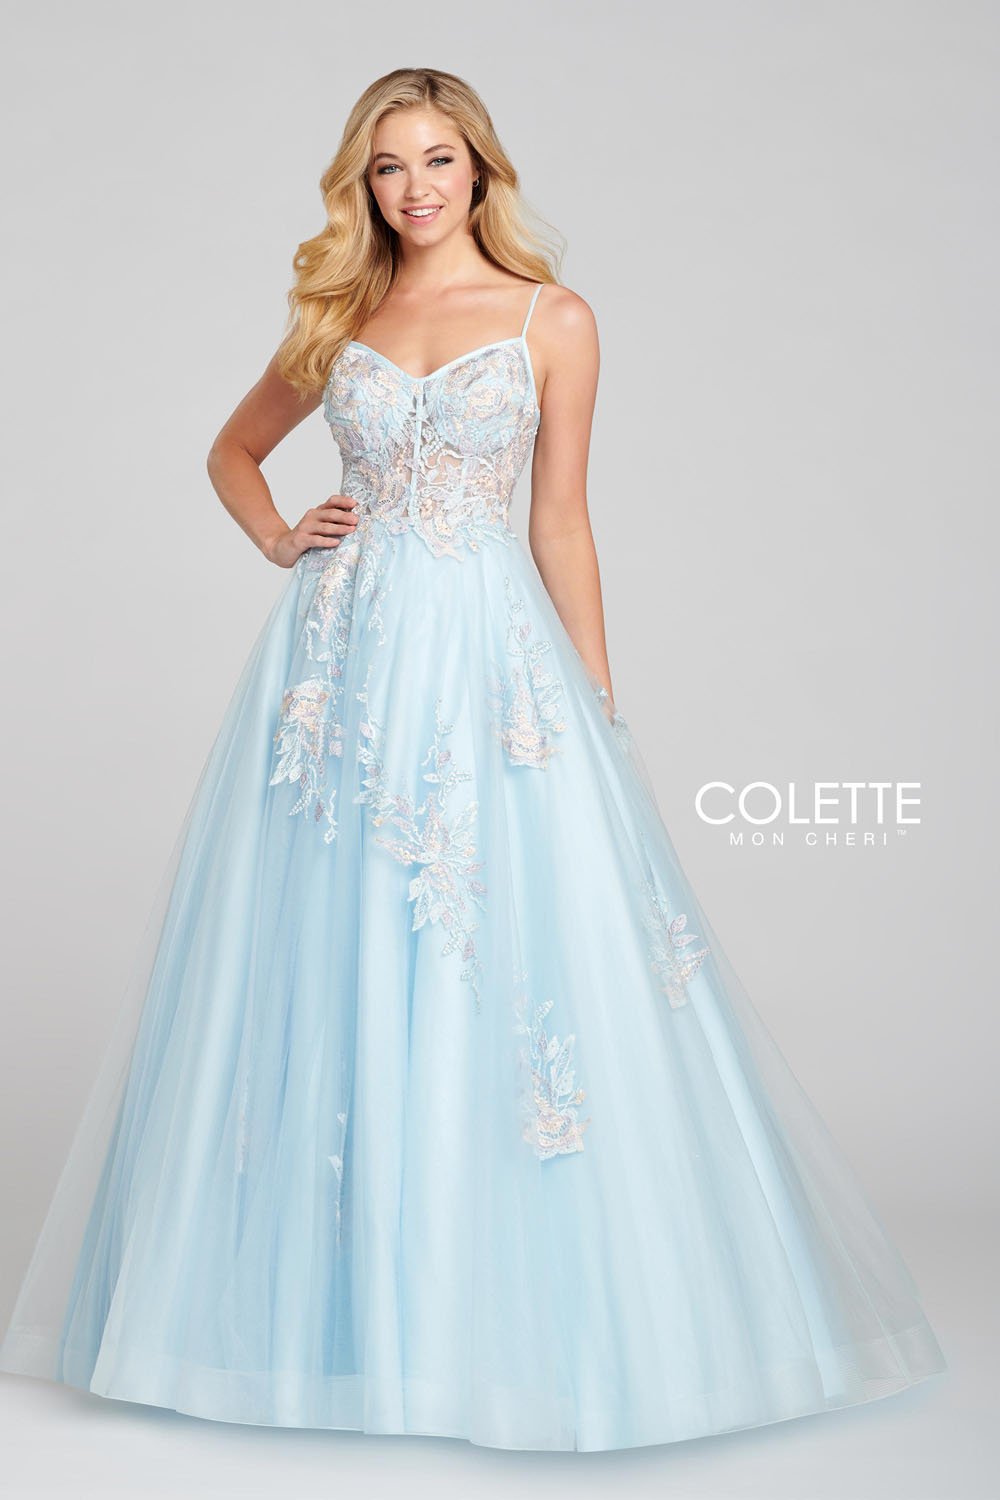 Colette CL12123 dress images in these colors: Sky Multi, Pink Multi, Lilac Multi.